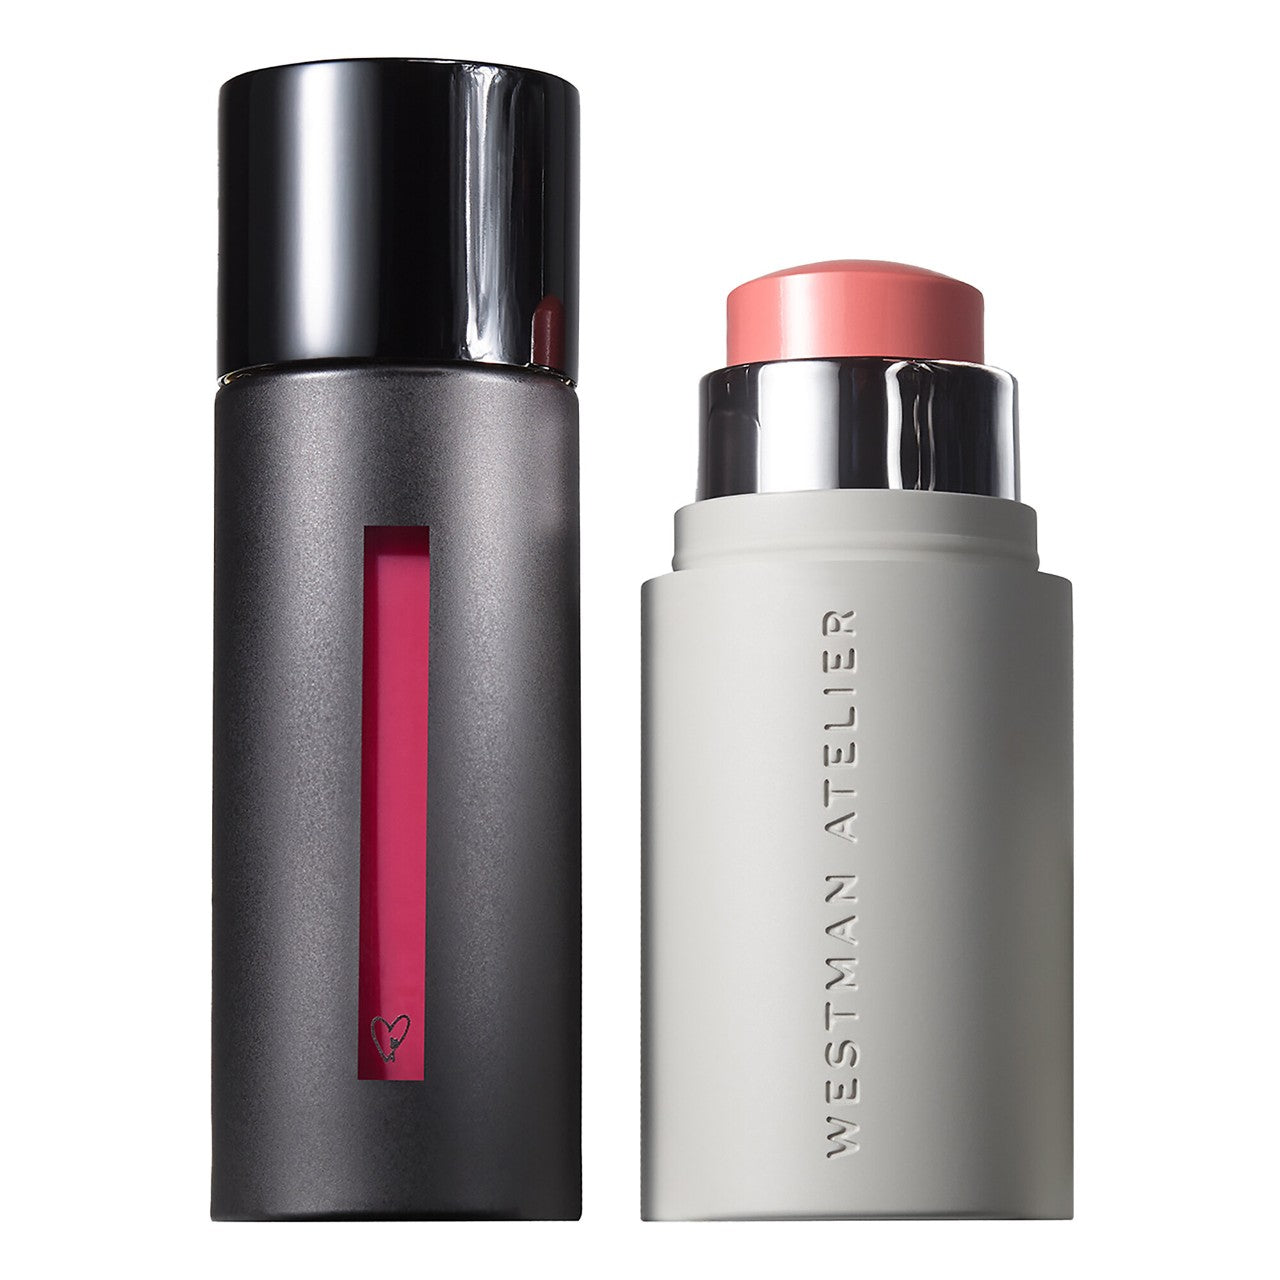 Westman Atelier Squeaky and Cheeky Duo Lip and Cheek Holiday Gift Set